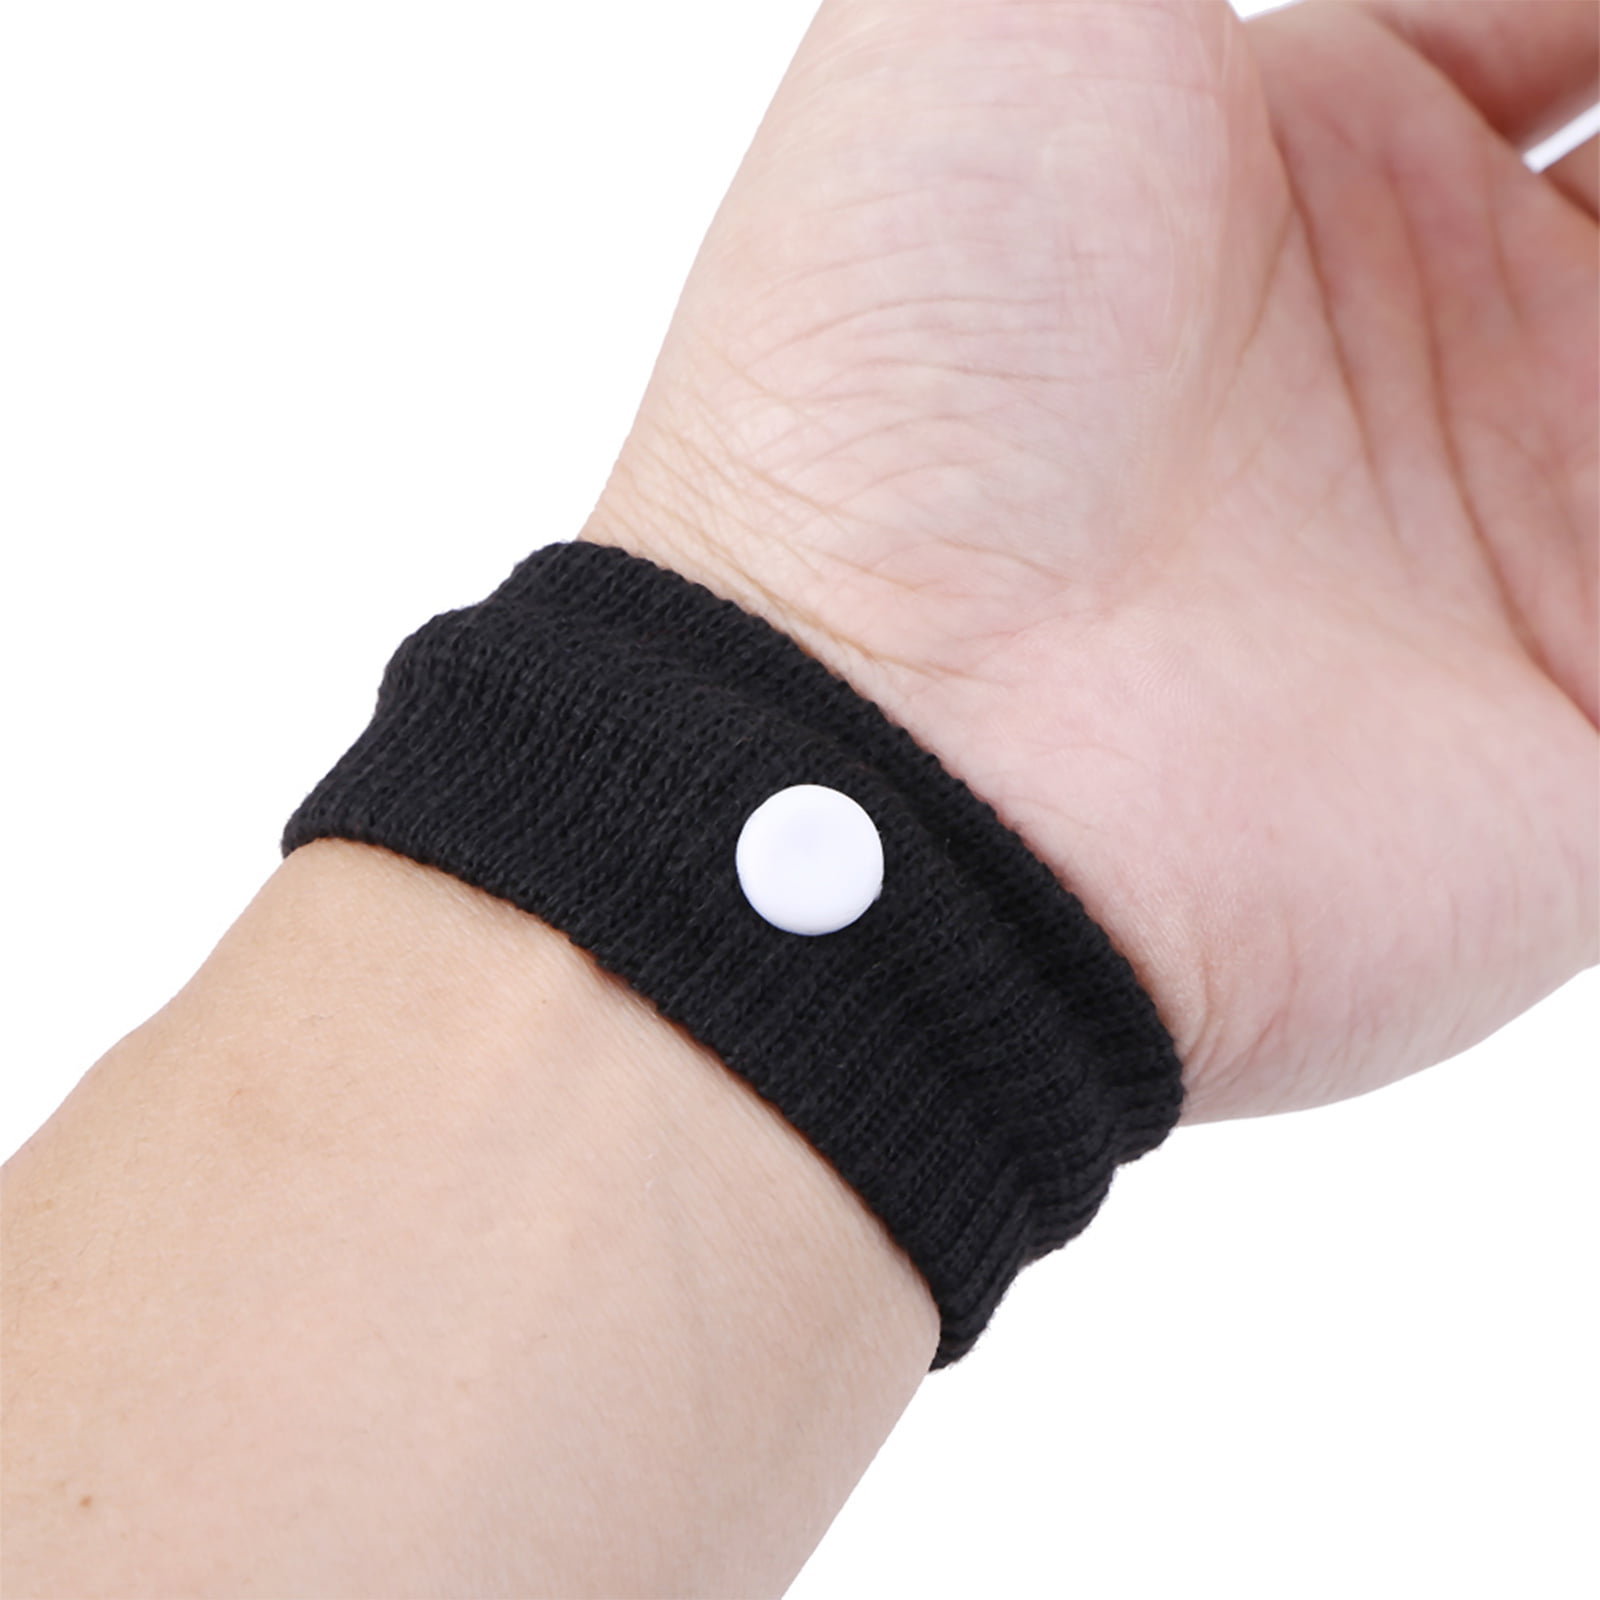 How the Reliefband Sport Helps Naturally Relieve Motion Sickness